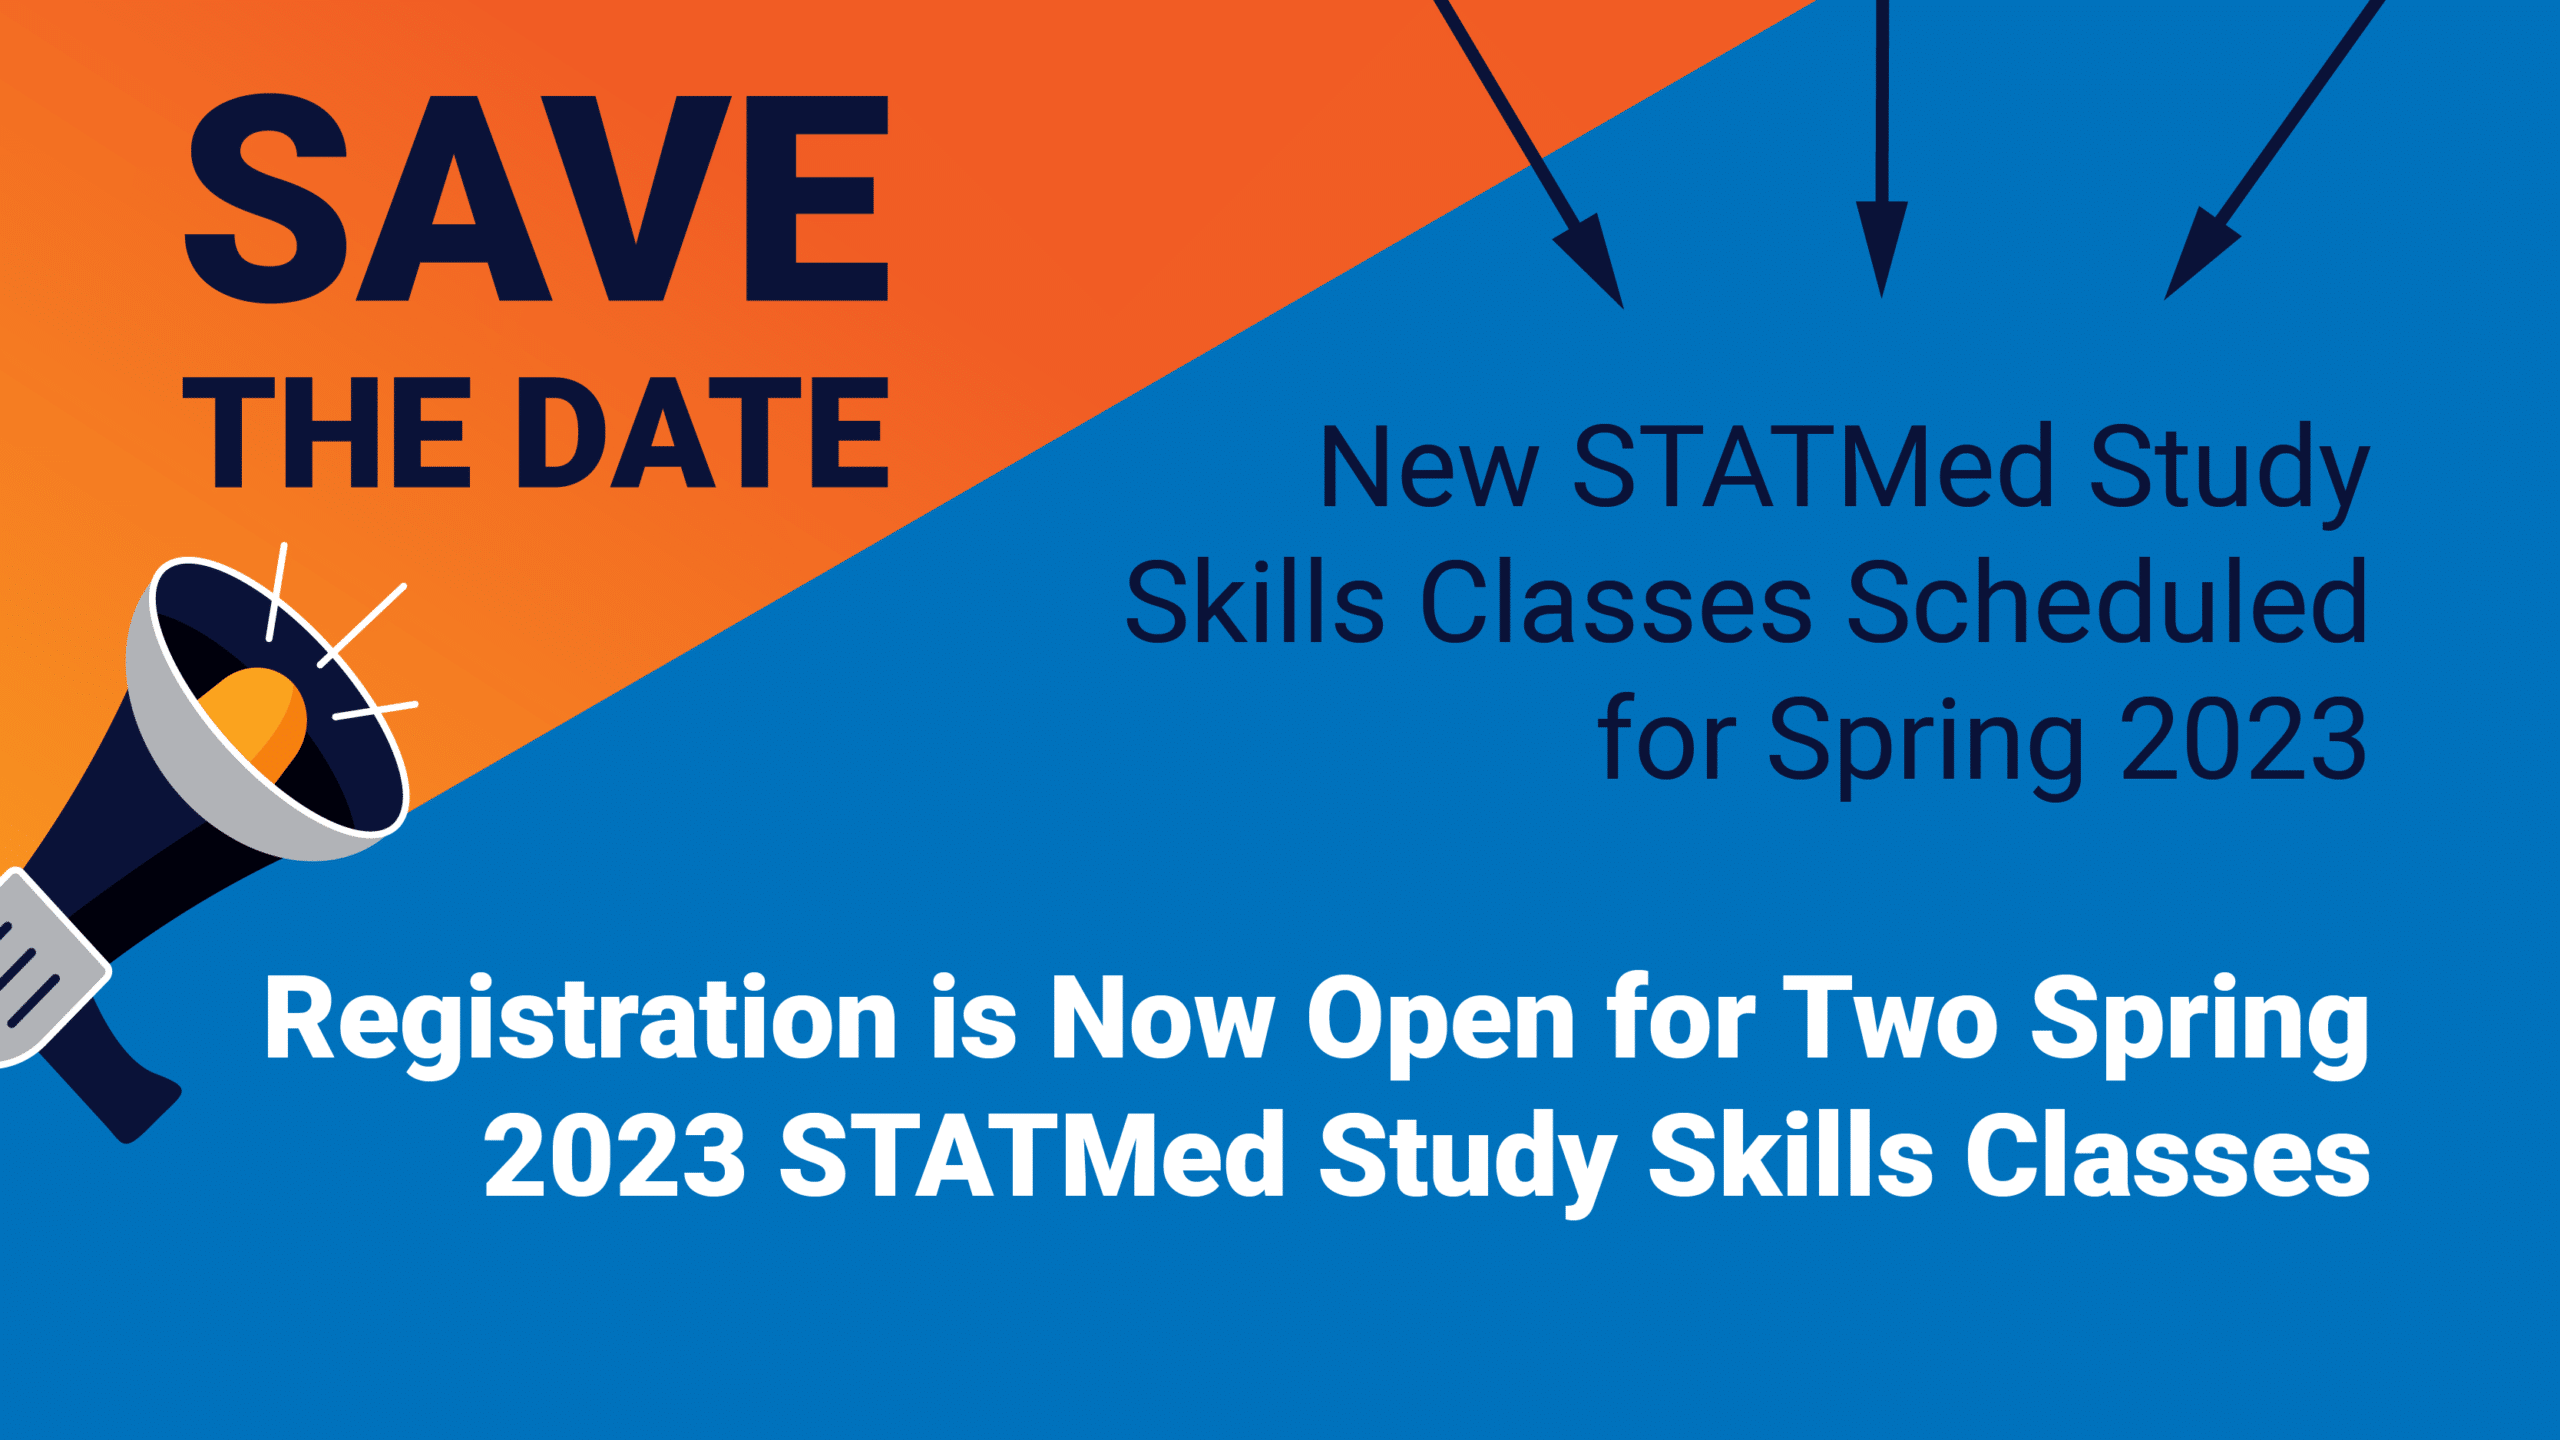 Featured image for “Save the Date: New STATMed Study Skills Classes Scheduled for Spring 2023”